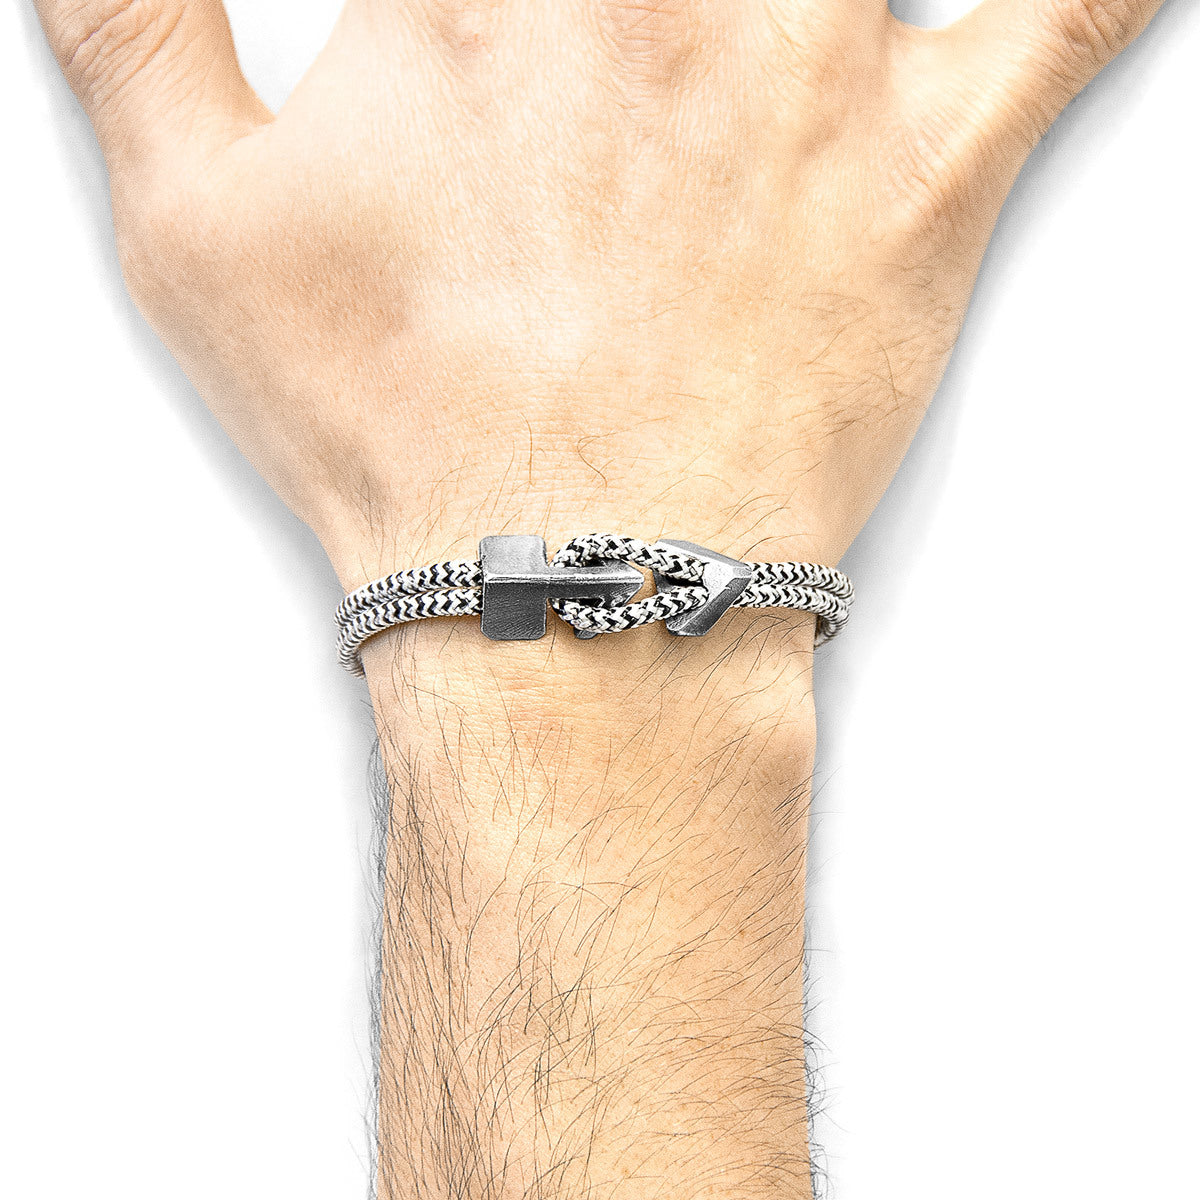 White Noir Brixham Silver and Rope Bracelet: Handcrafted in Great Britain with Marine Grade Polyester and Sterling Silver Clasp - Jewelry & Watches - Bijou Her -  -  - 